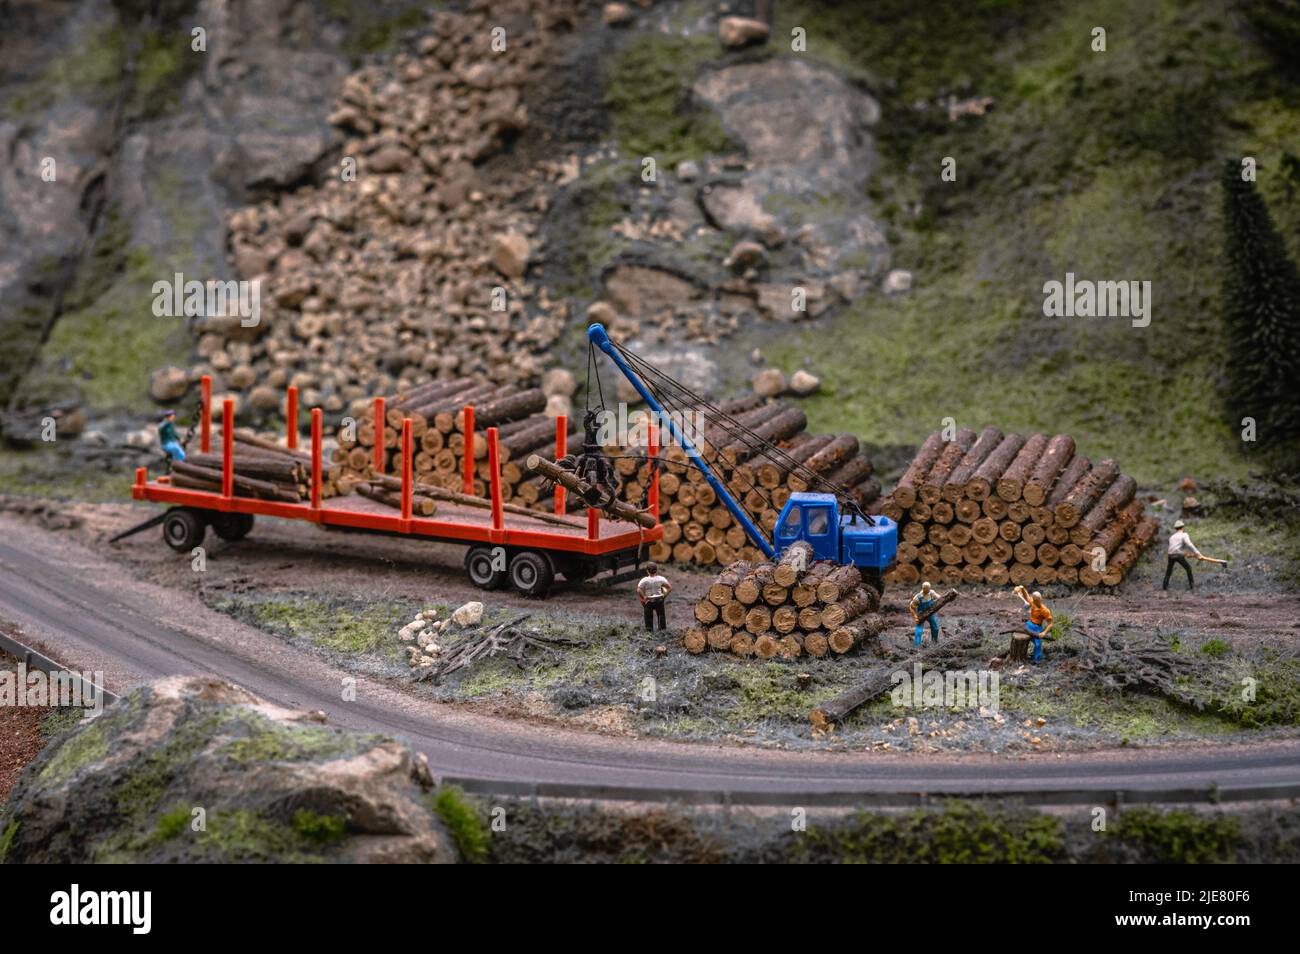 Toy representation of deforestation. Purposeful clearing of forested land. Stock Photo